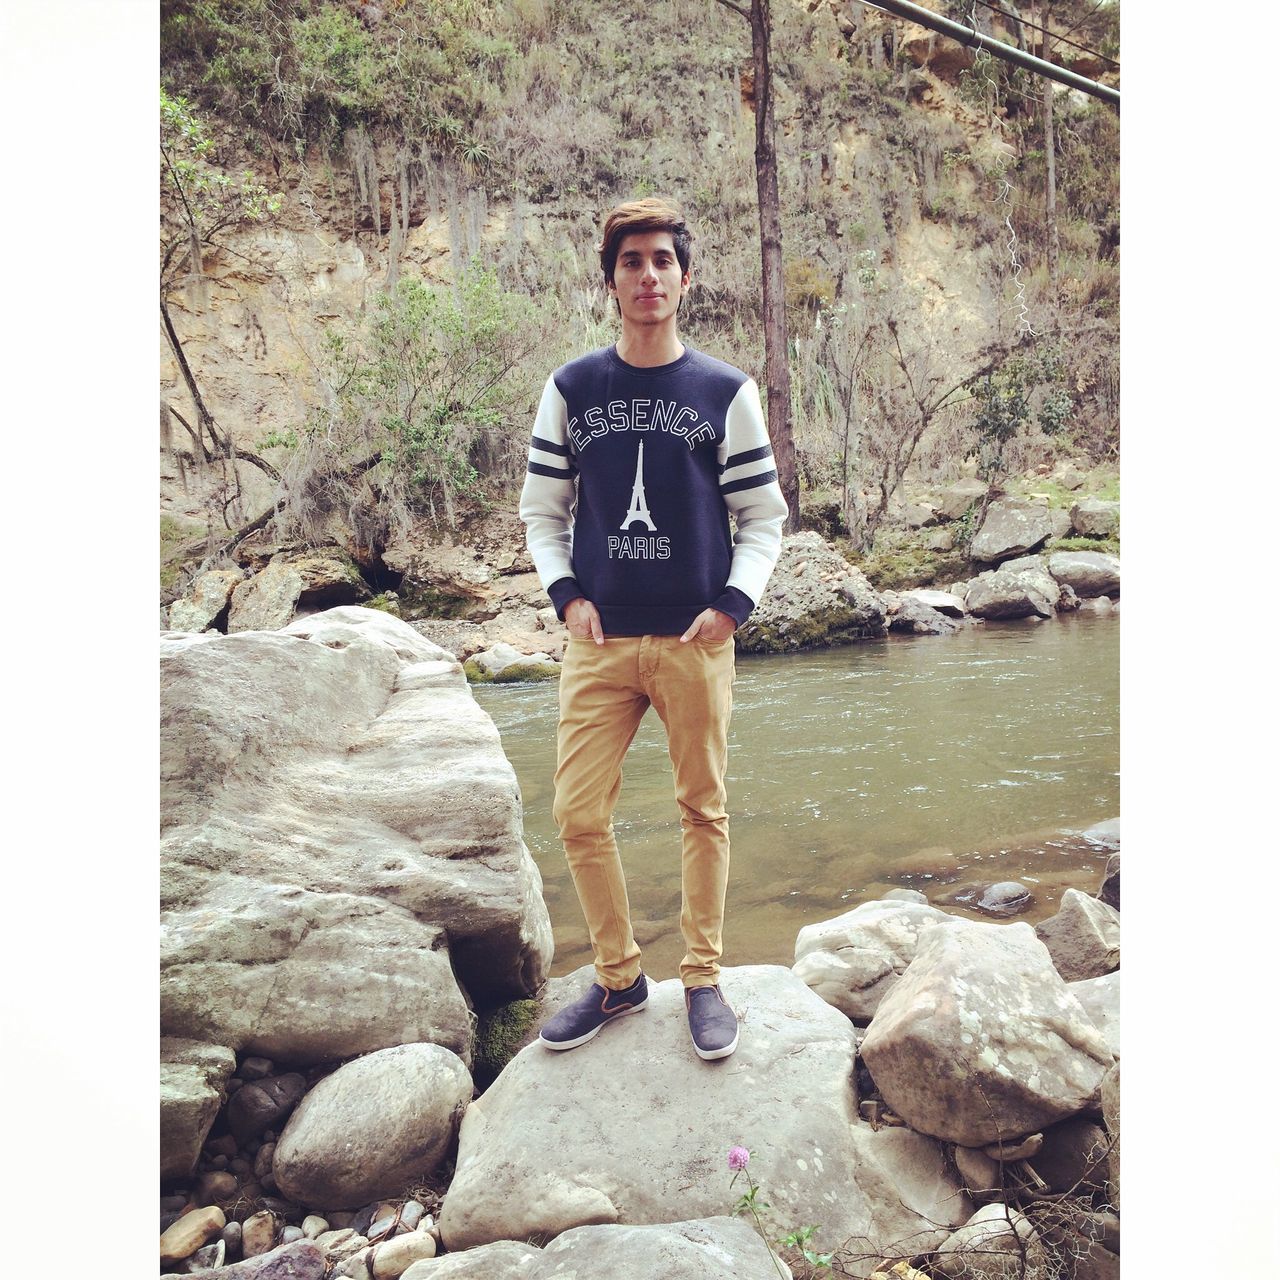 lifestyles, rock - object, standing, portrait, transfer print, leisure activity, full length, young adult, looking at camera, casual clothing, front view, person, auto post production filter, rock, young men, forest, water, nature